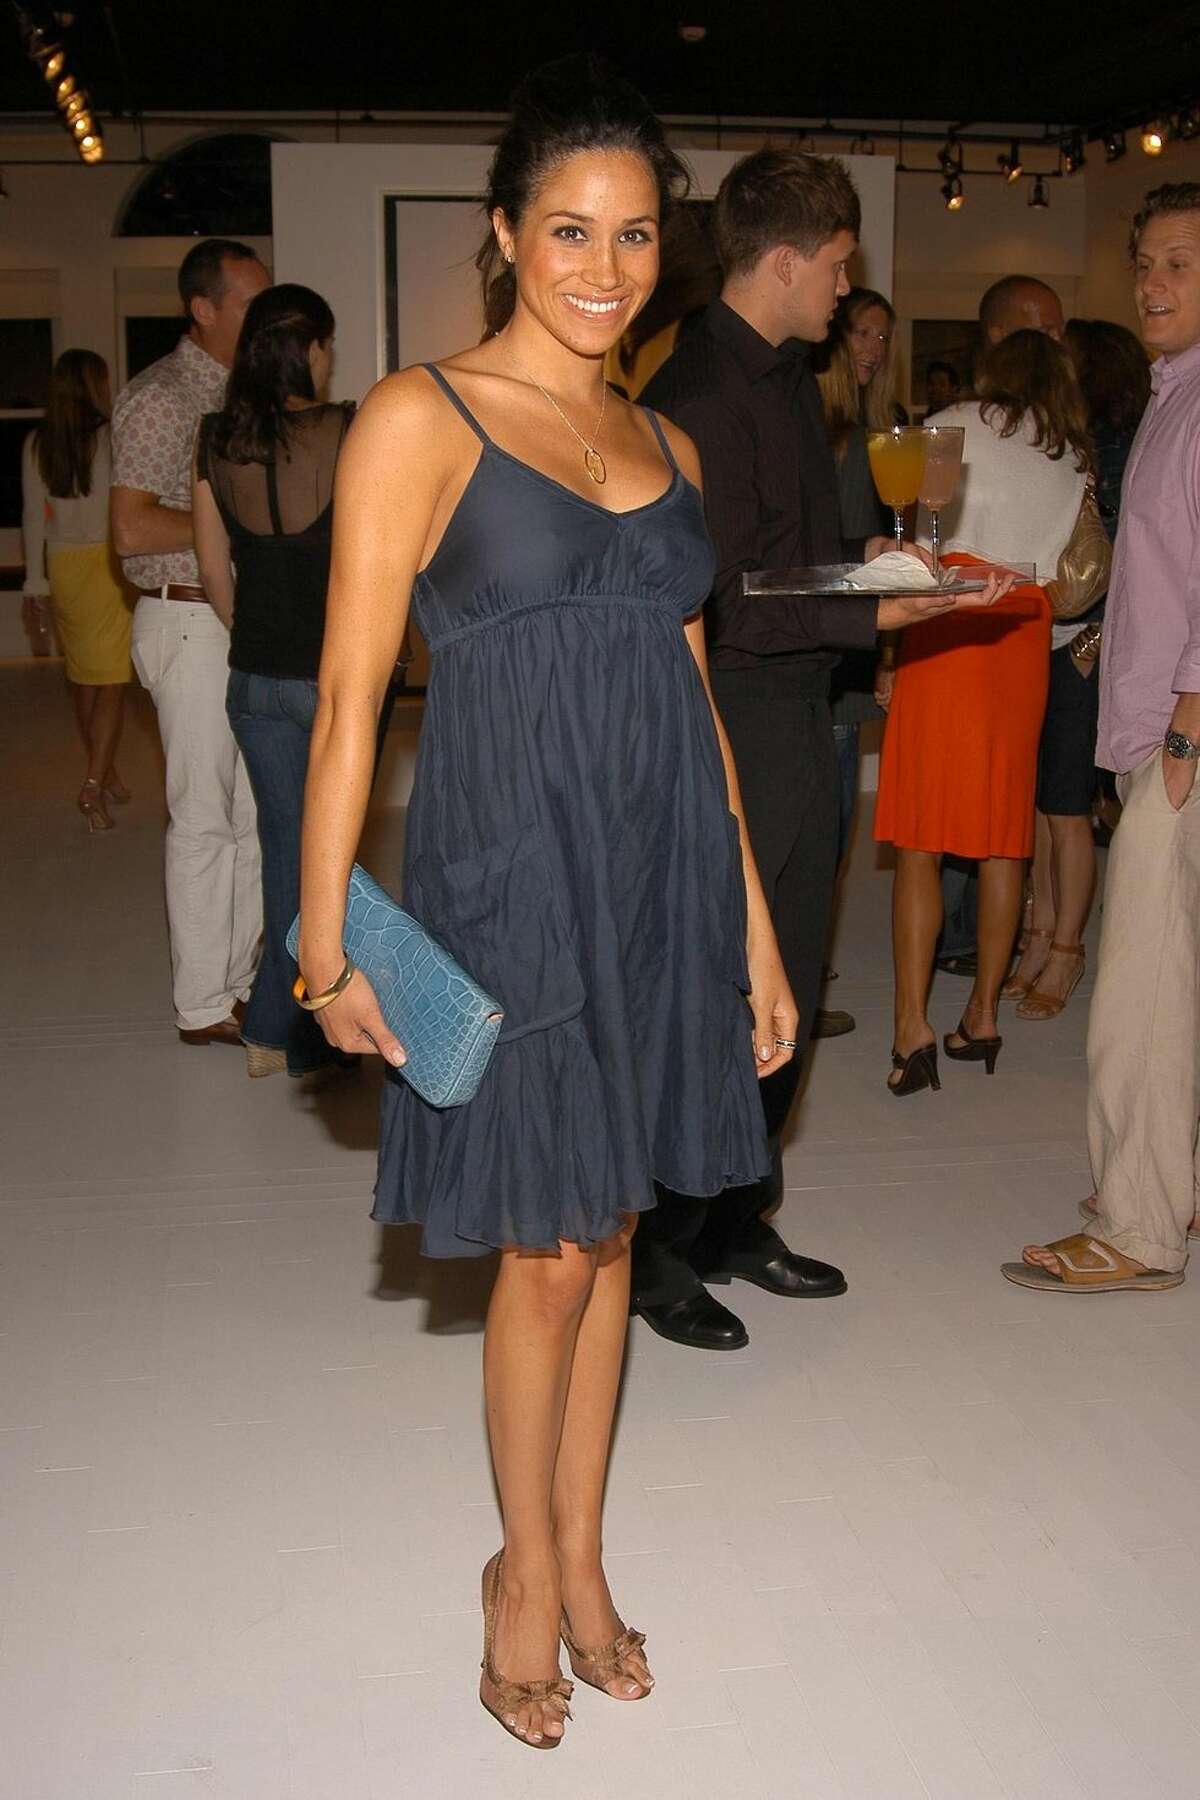 GALLERY: Meghan Markle through the years Meghan Markle Attending an event in New York in 2005.